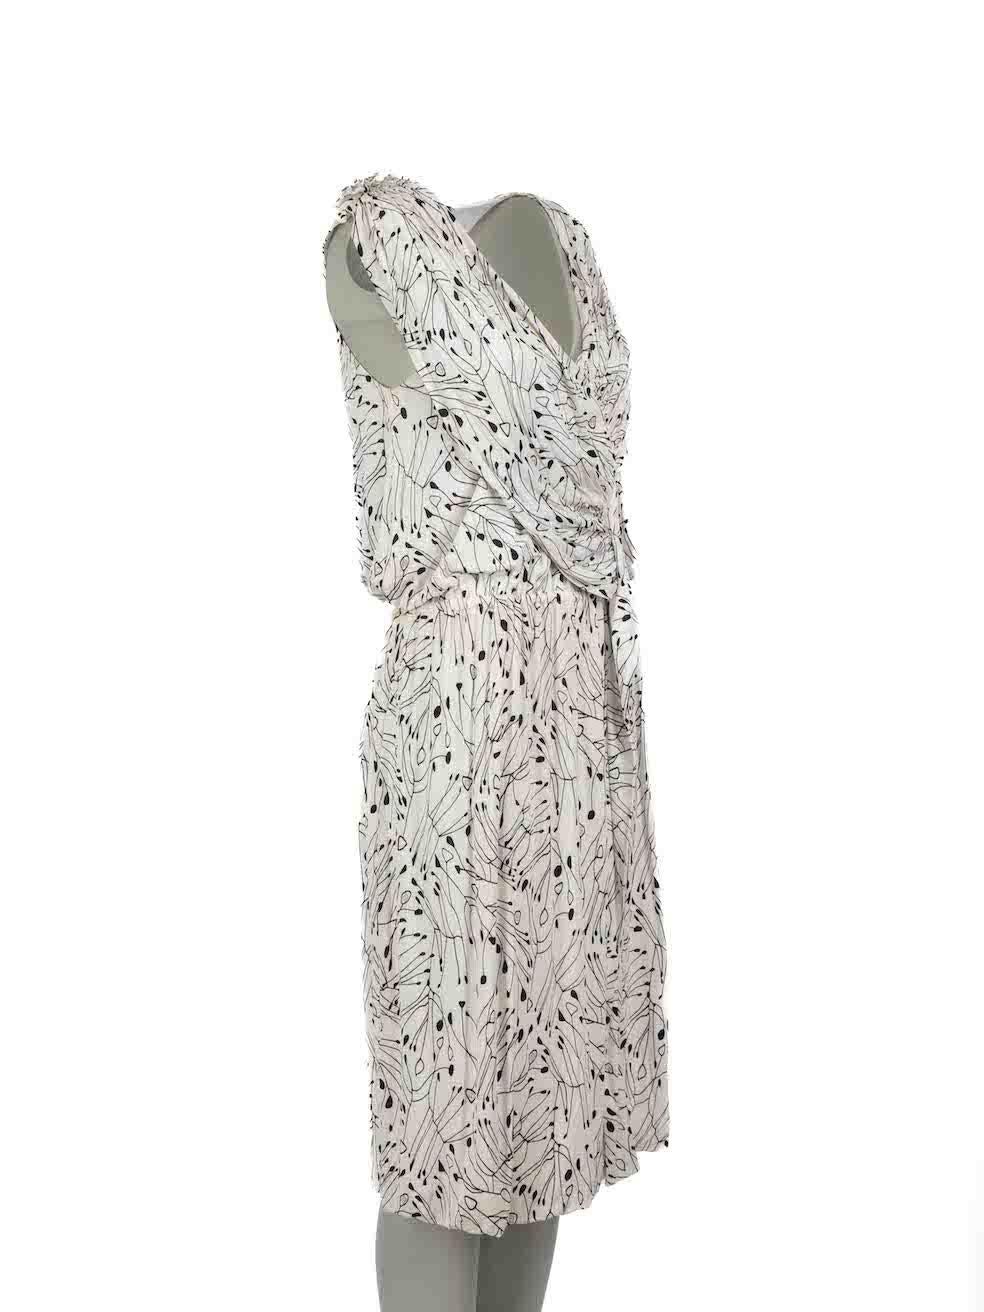 CONDITION is Very good. Minimal wear to dress is evident. Minimal wear to the underarms and the rear neckline lining with discoloured marks on this used Fendi designer resale item.
 
Details
White
Synthetic
Midi dress
Patterned
V